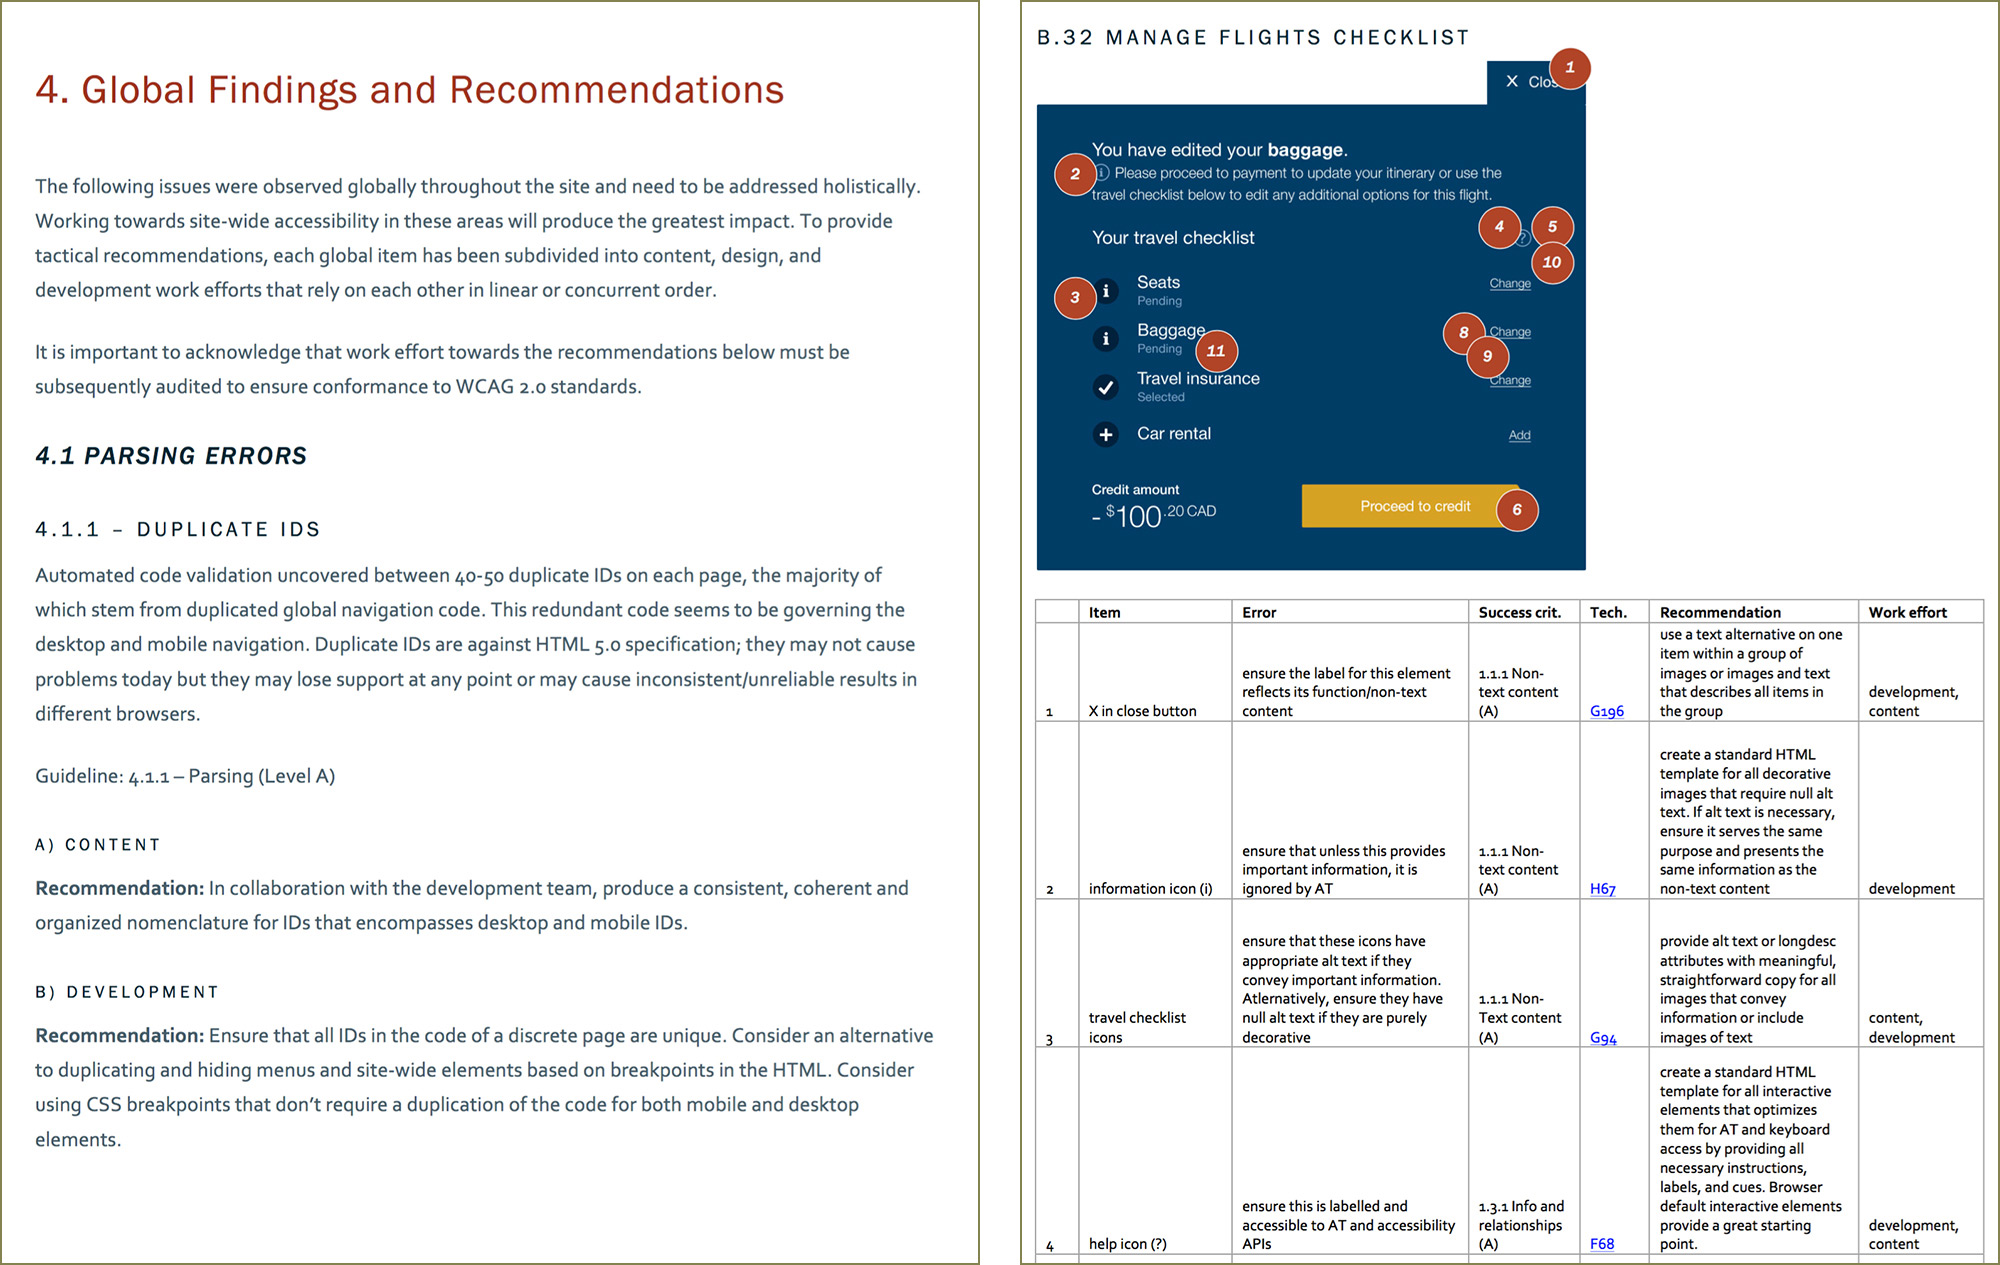 A selection of screens from the final accessibility report, showcasing the writing style, different components of the report, and appendix of screen-level findings.